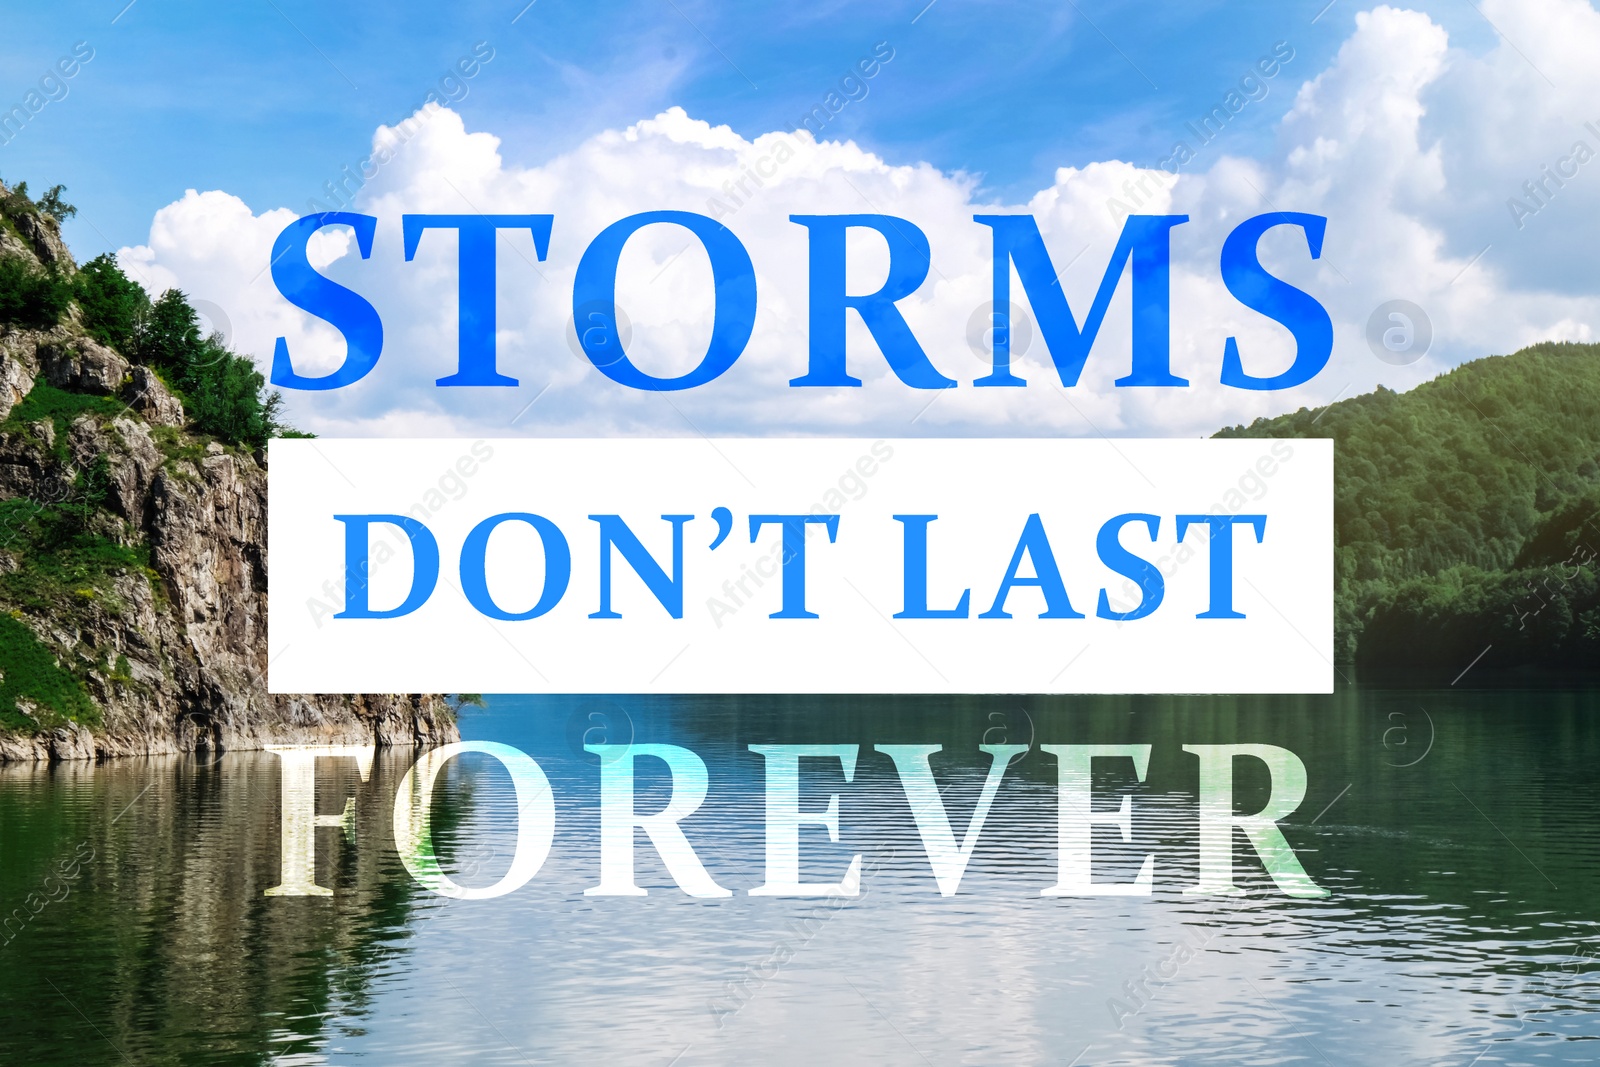 Image of Storms Don't Last Forever. Inspirational quote motivating to believe in future, to remember that bad times aren't permanent, they will change. Text against beautiful lake surrounded by mountains